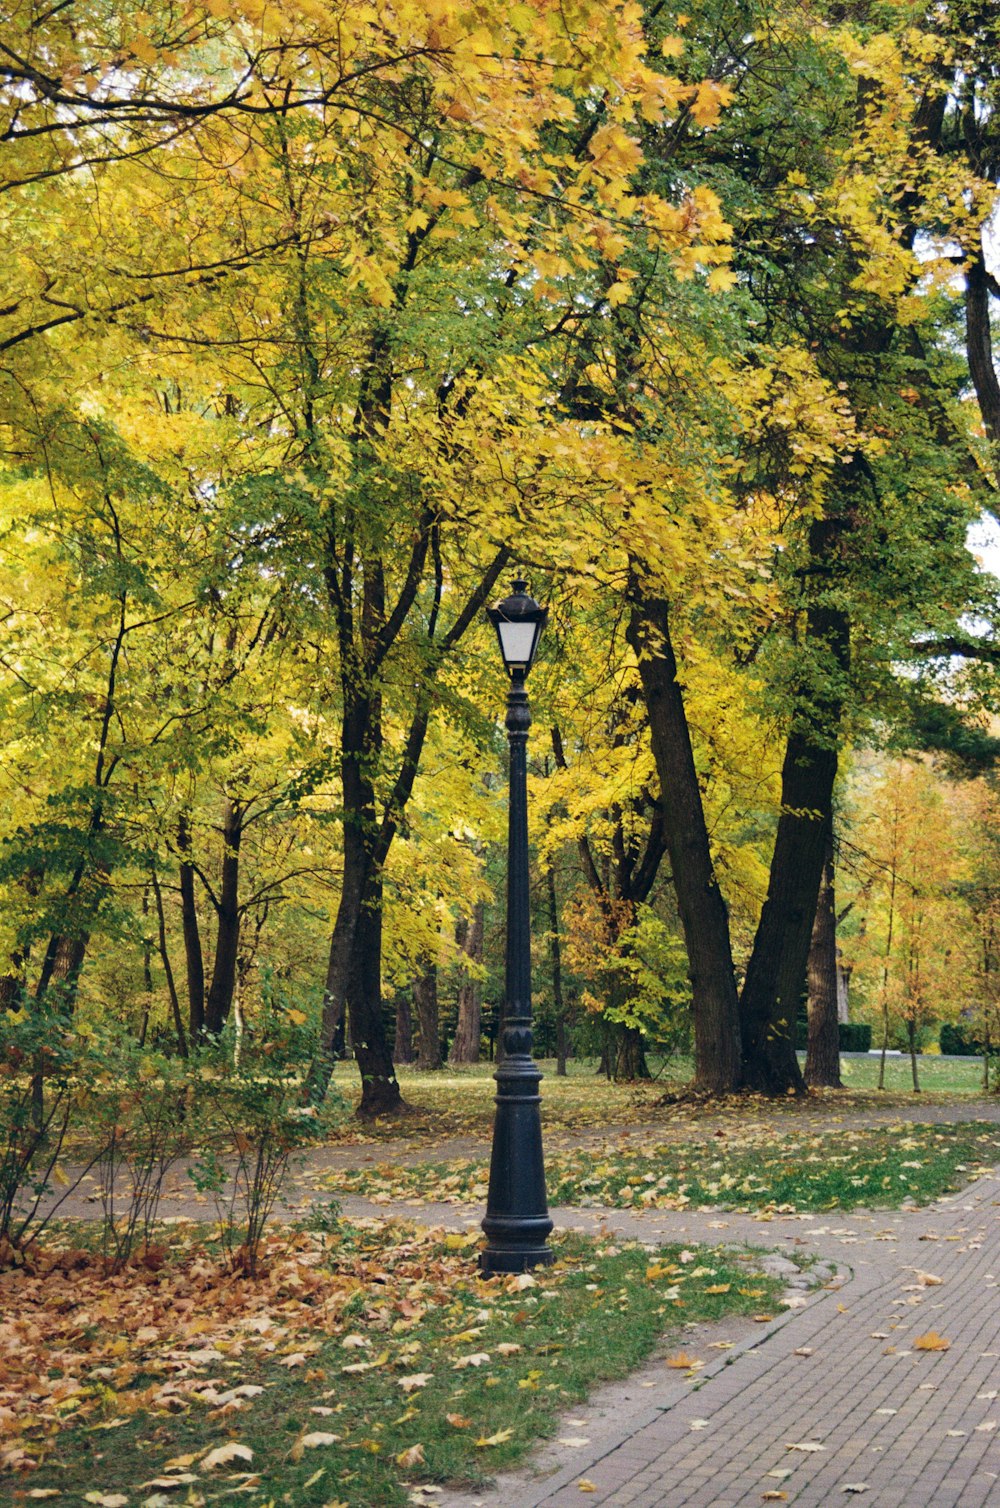 a lamp post in a park surrounded by trees